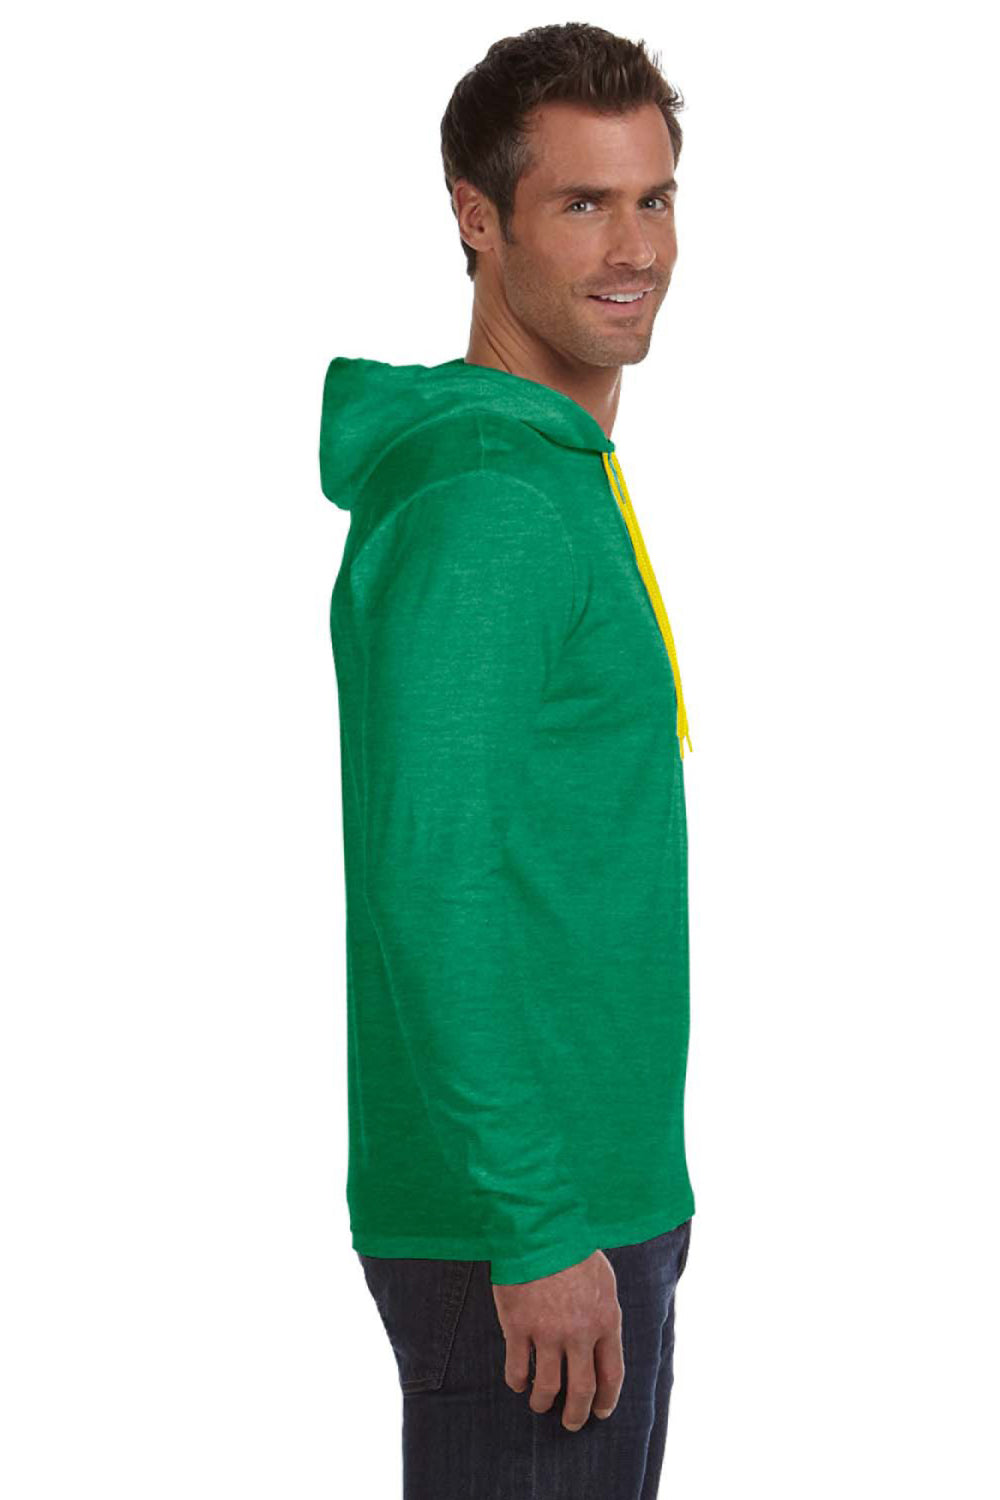 Anvil 987AN Mens Long Sleeve Hooded T-Shirt Hoodie Heather Green/Neon Yellow Side